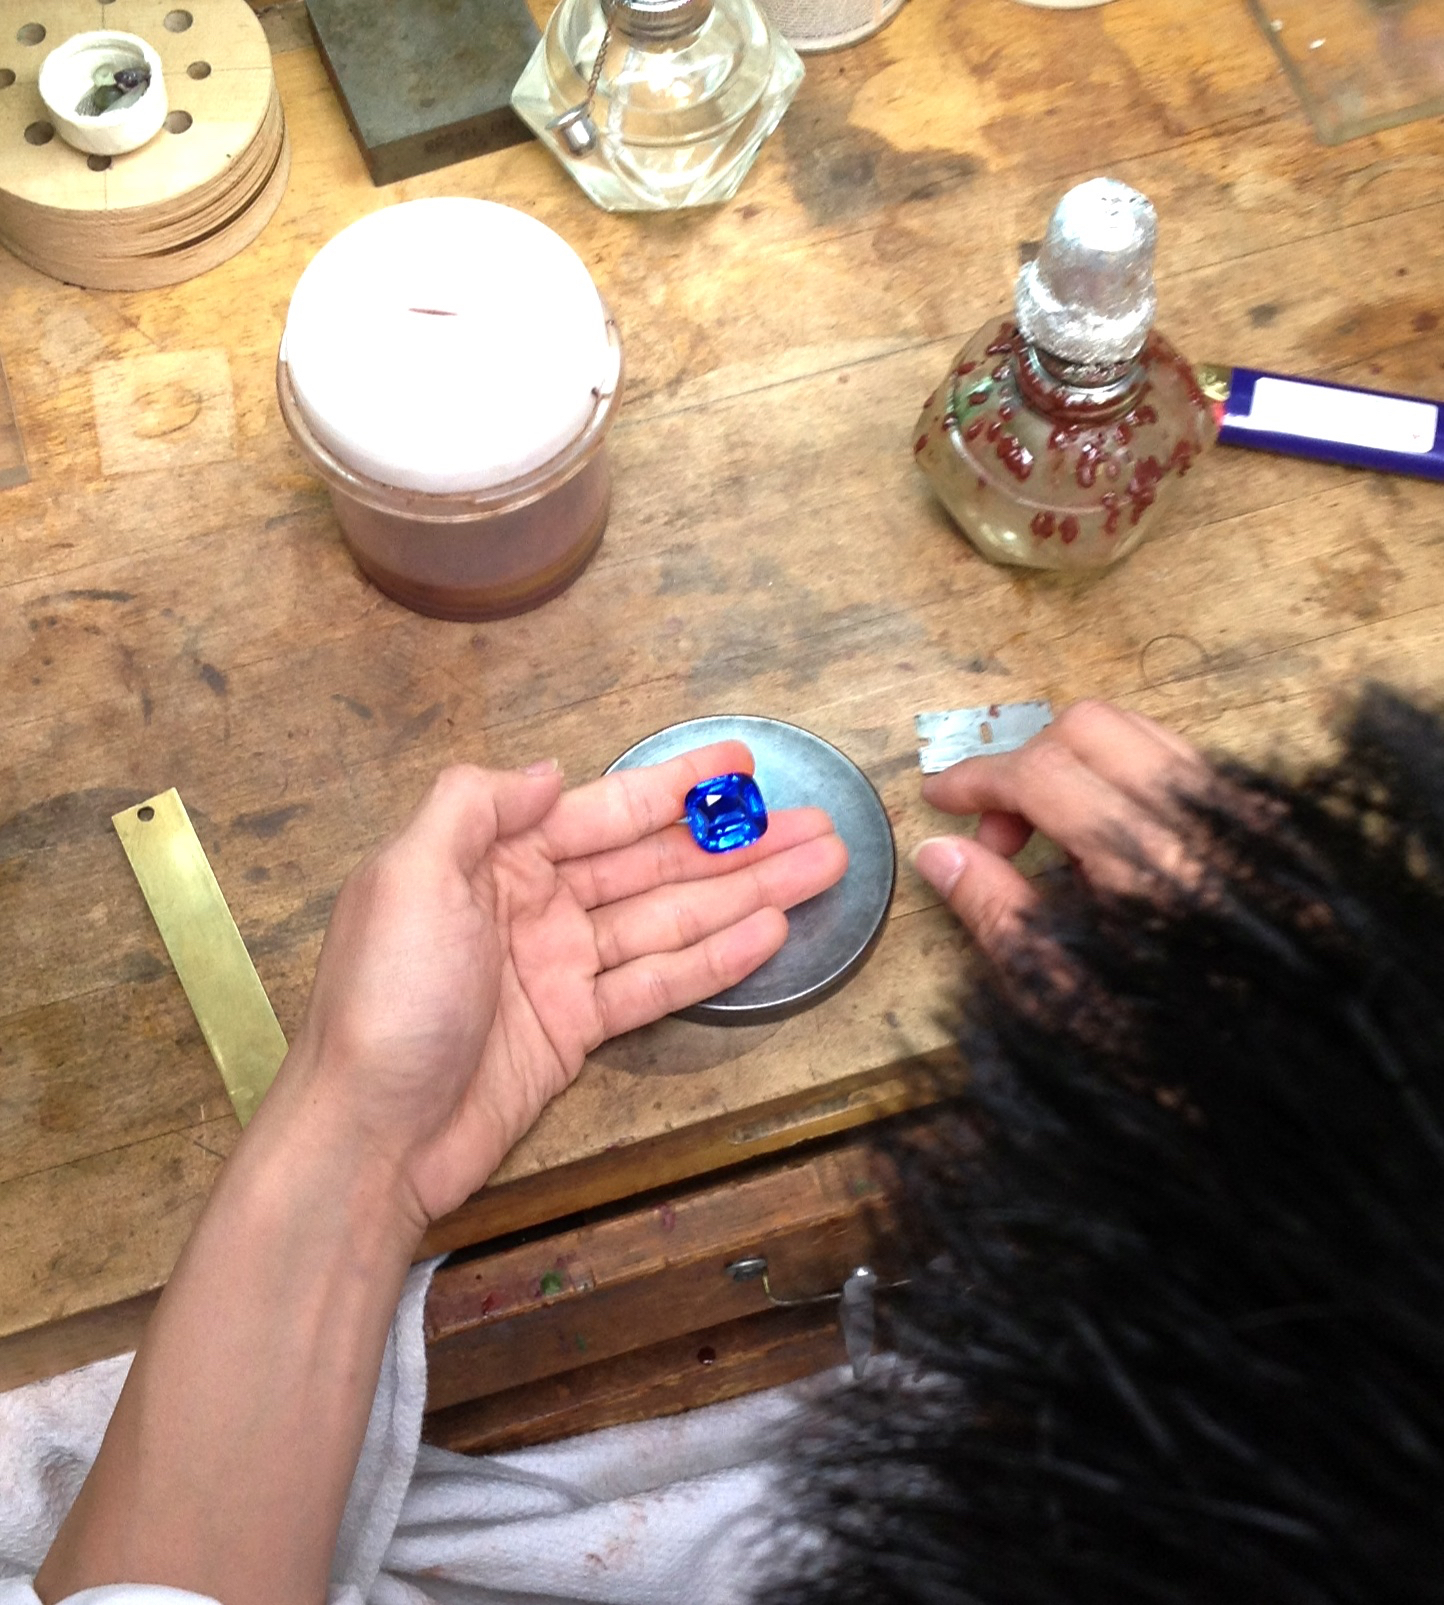 The polisher inspects his work on a 38 carat sapphire